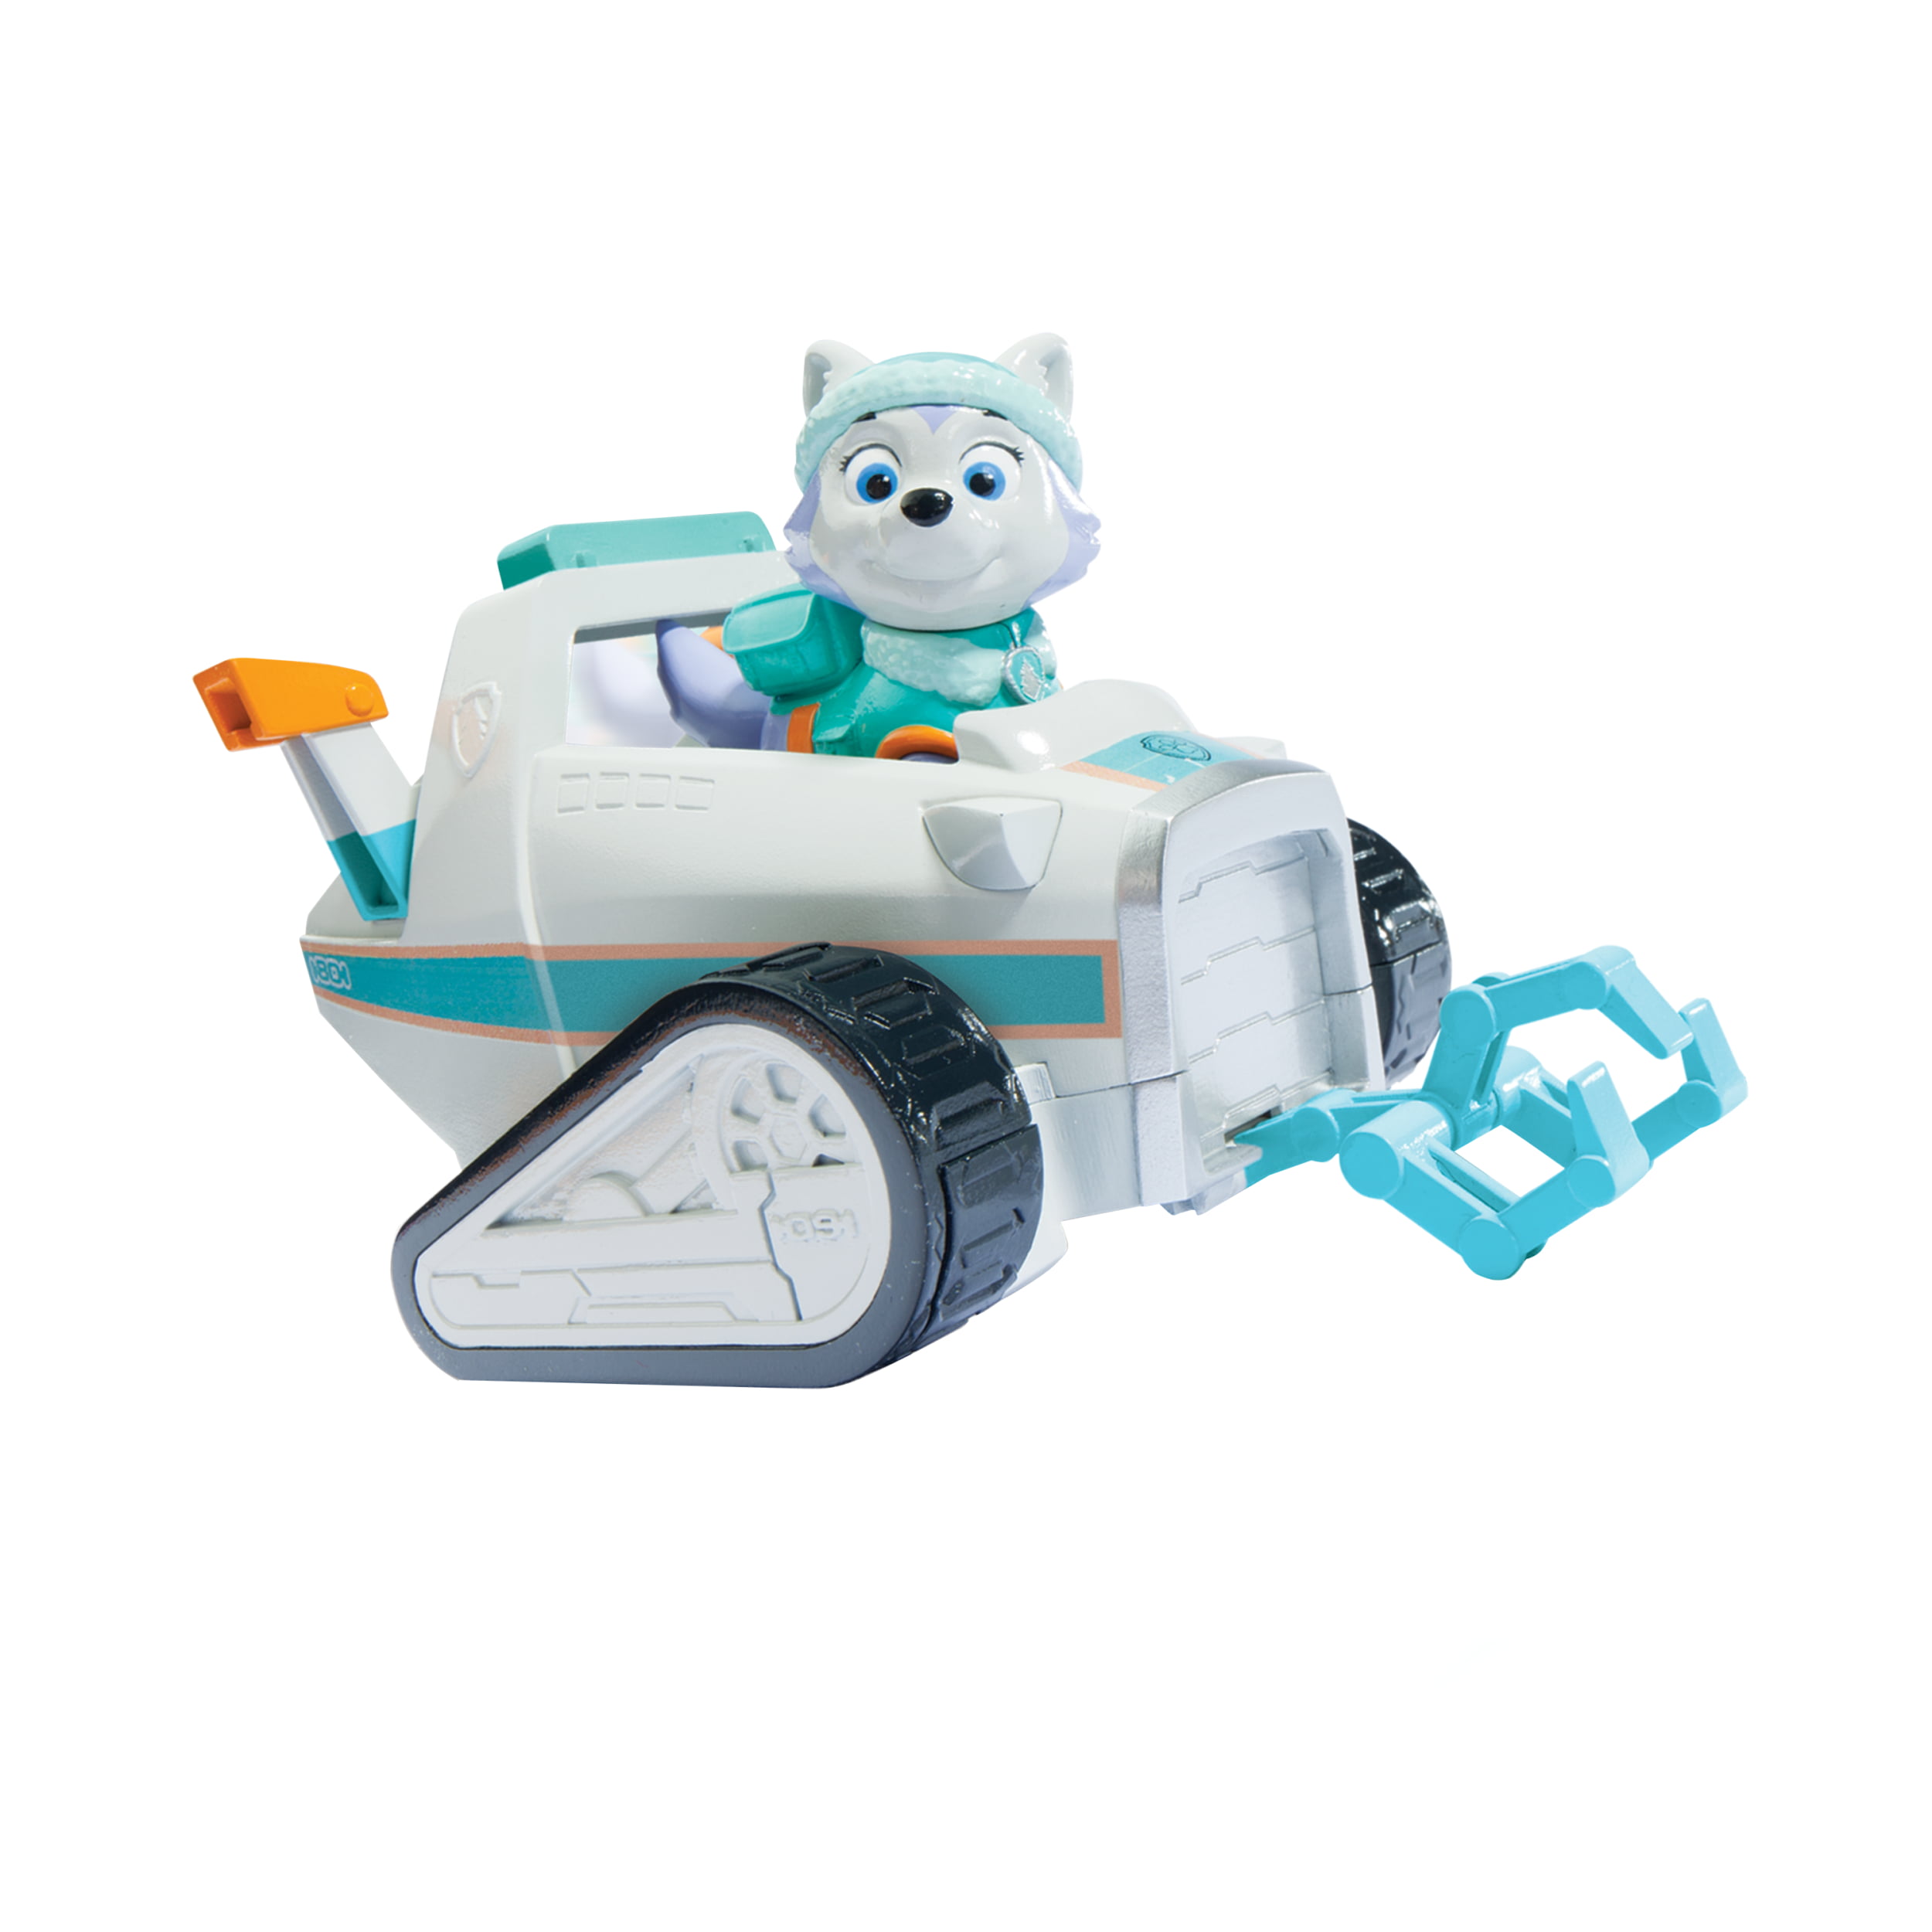 Includes Blizy Pen Paw Patrol Everests Rescue Snowmobile Ryders Rescue ATV Vechicle and Figure 